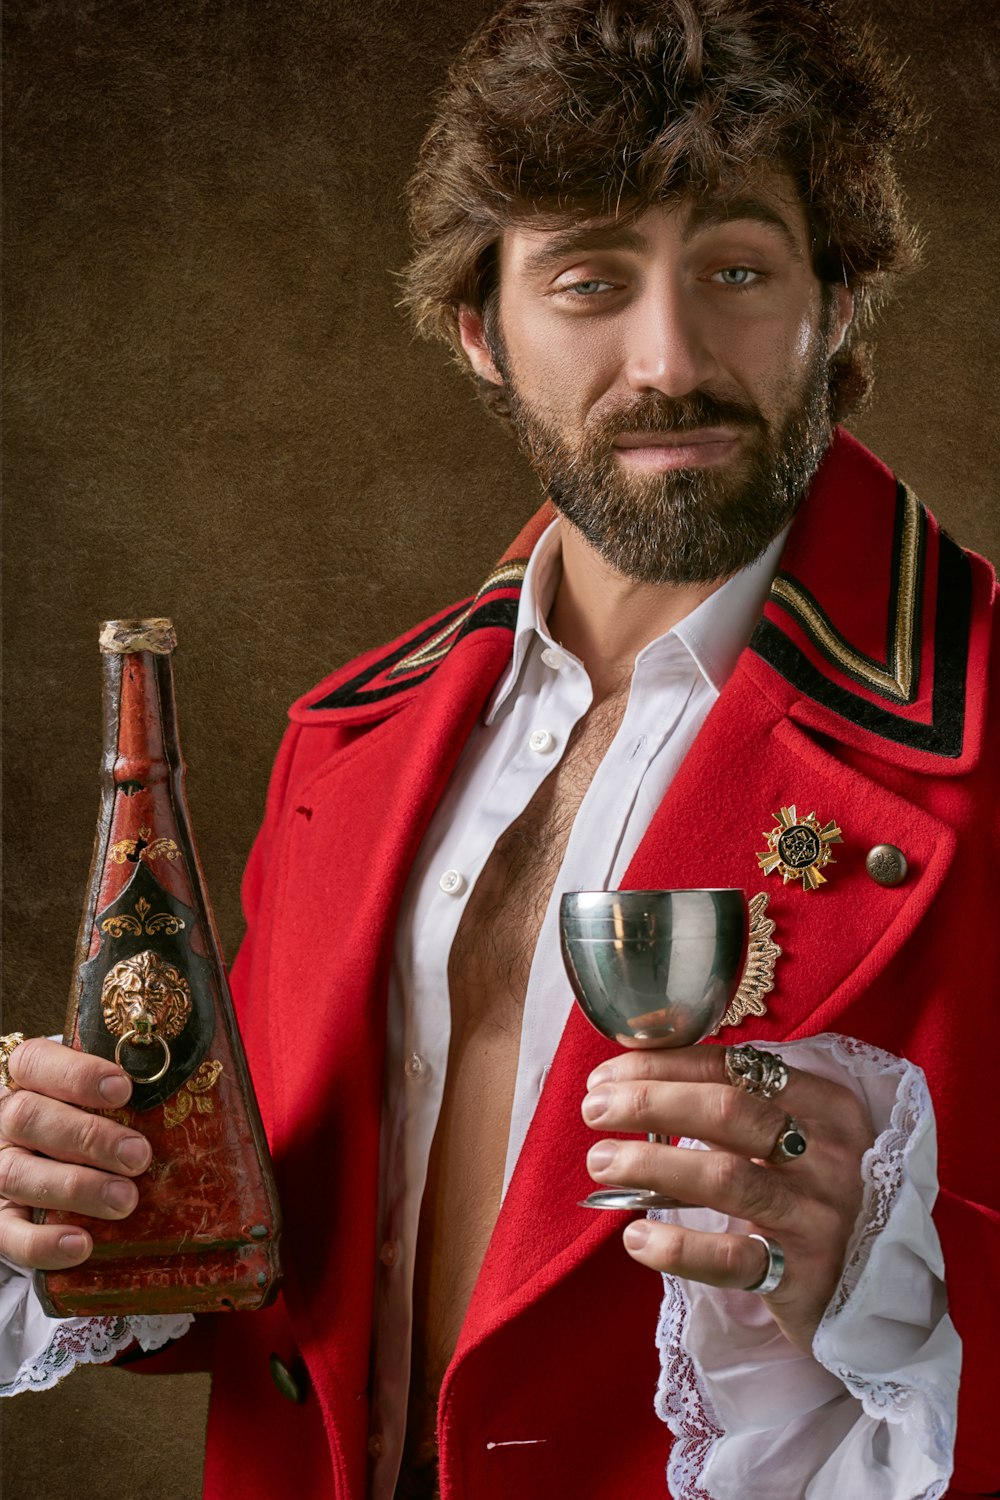 man wearing red and black coat standing and holding bottle and glass of wine